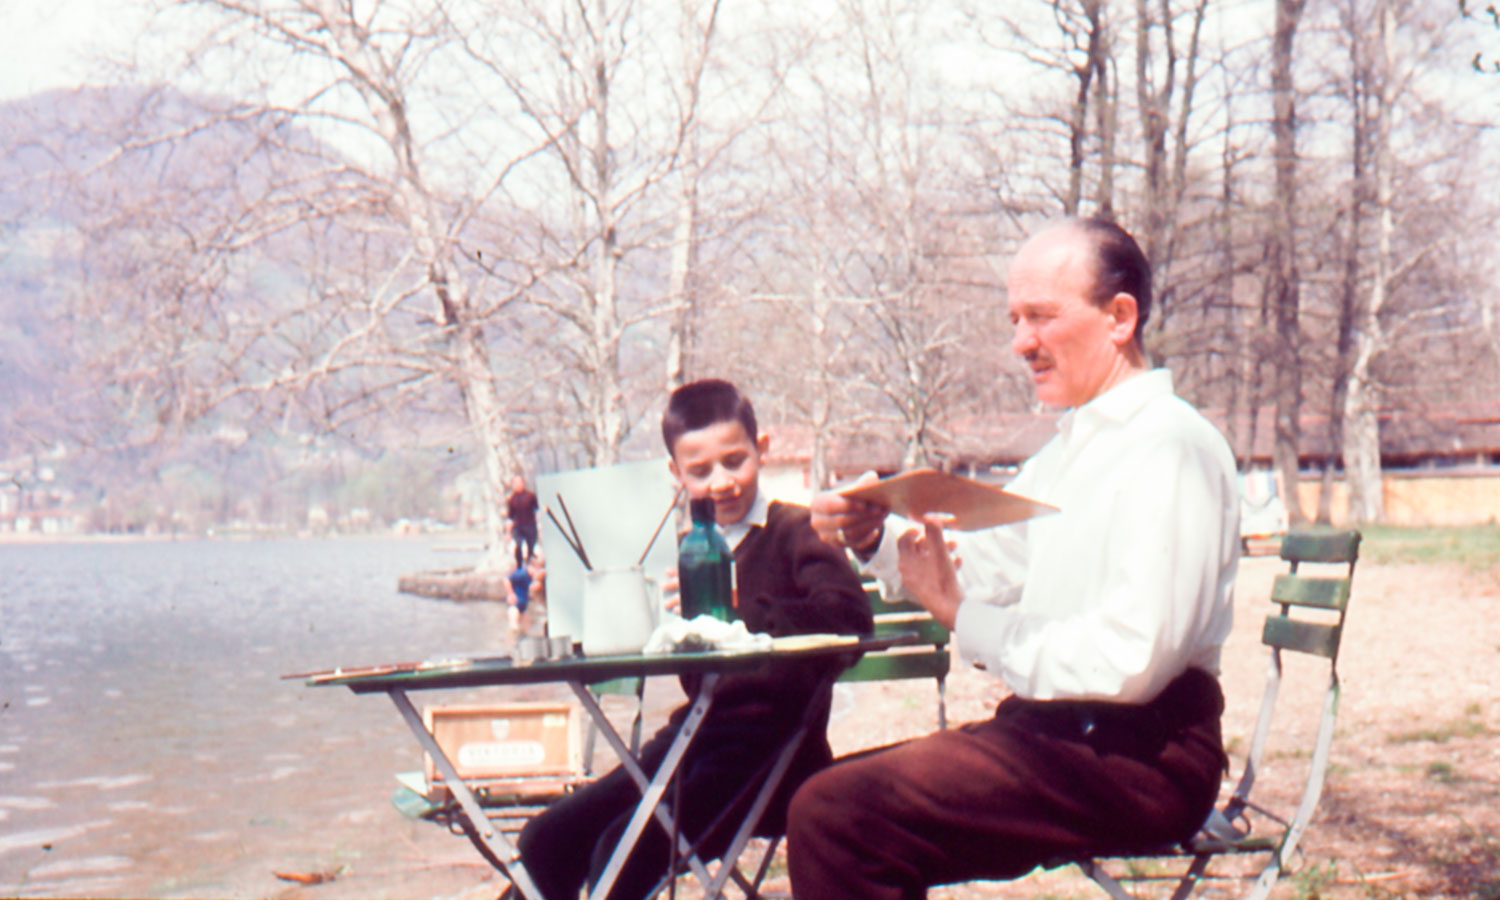 Wilhelm Walter at the table with his son